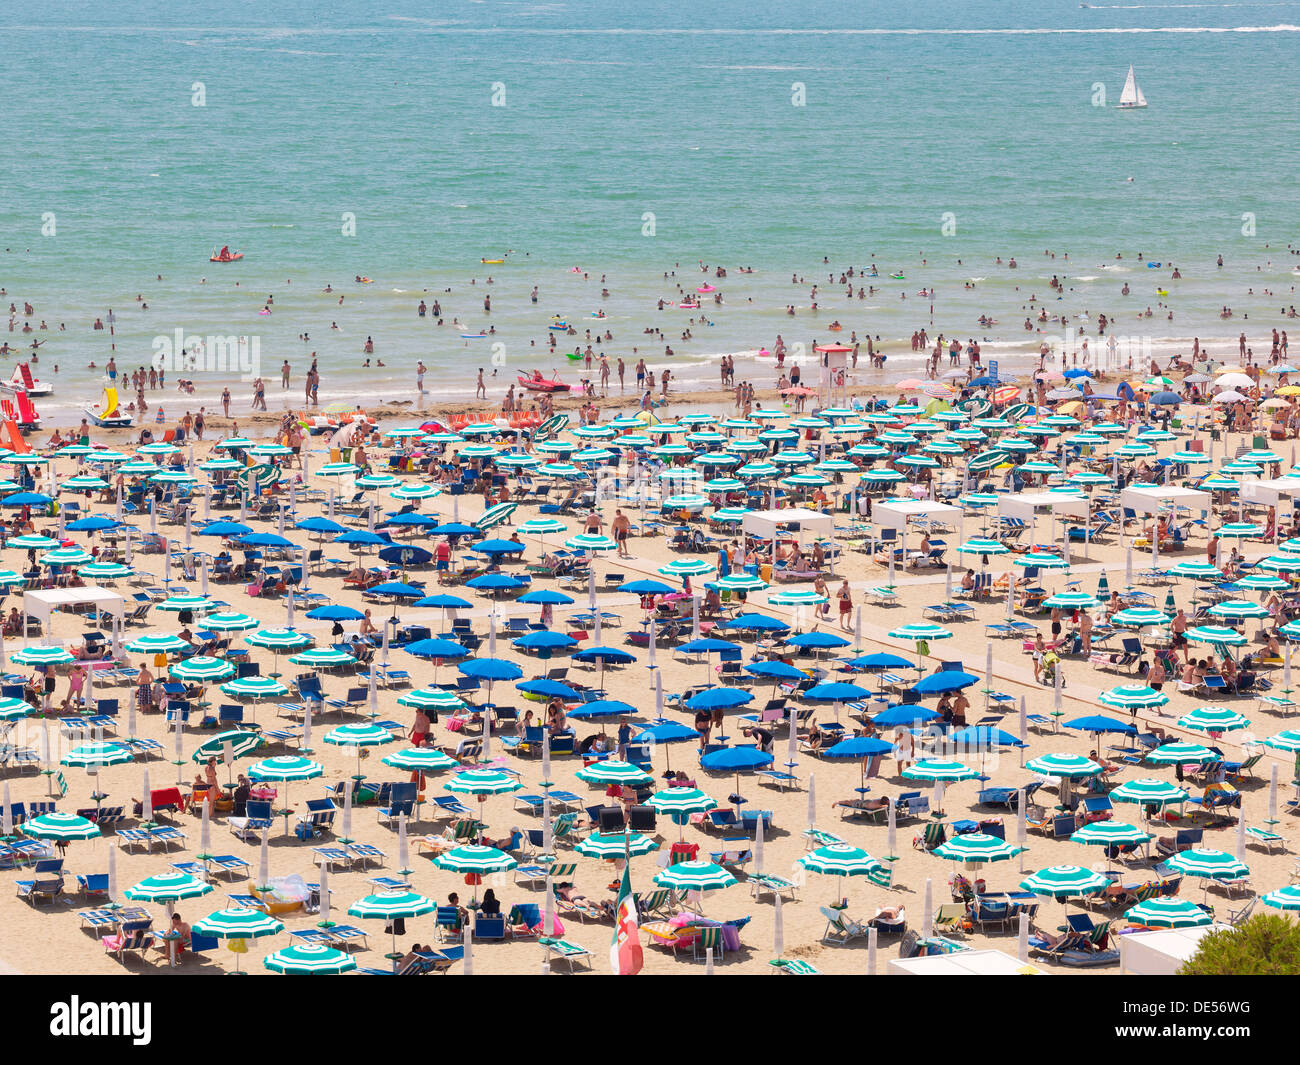 View of the beach with parasols, sun loungers and bathers, Lignano Sabbiadoro, Udine, Adriatic Coast, Italy, Europe Stock Photo